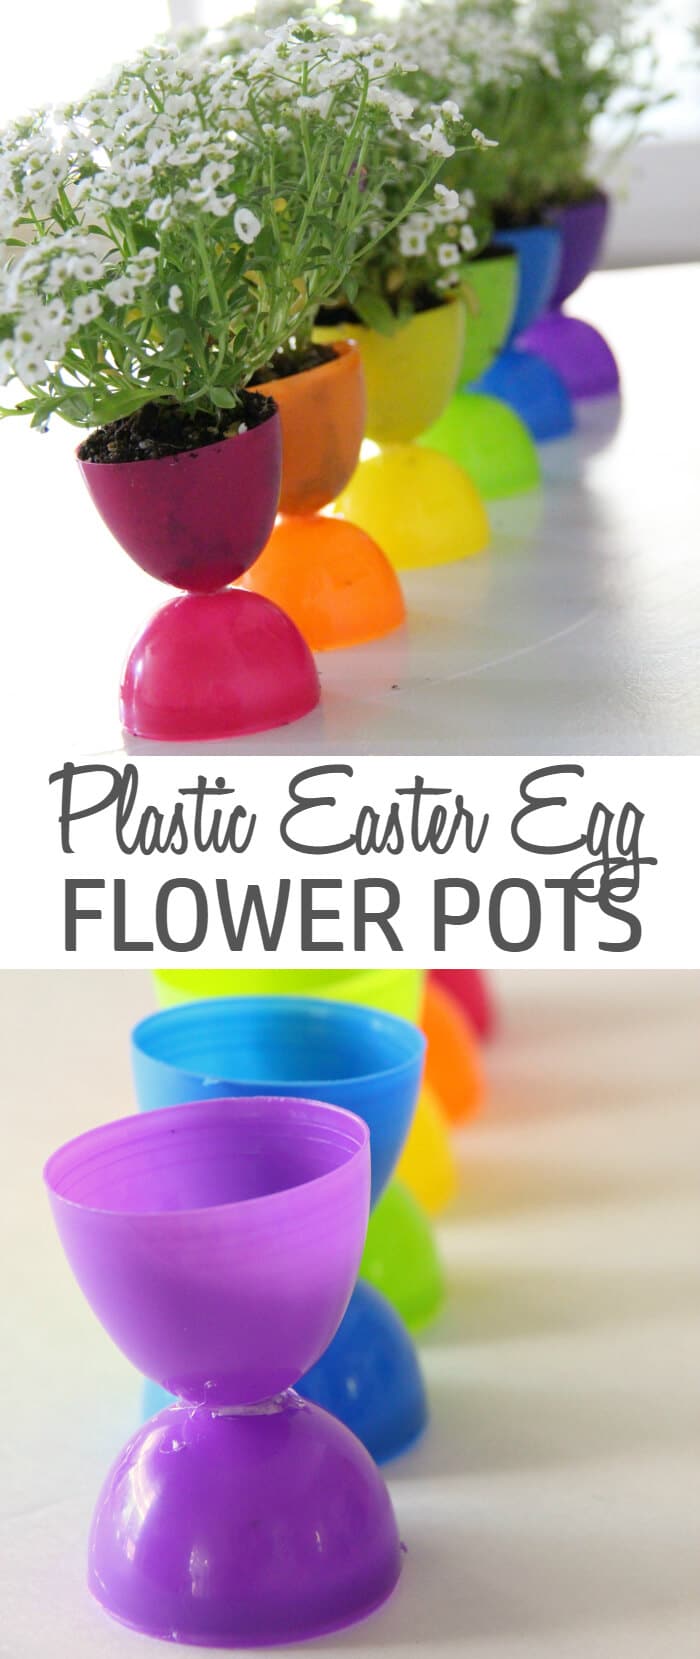 Plastic Easter Egg Pots | Easter Decorations | Easter Table Settings | Rainbow Easter | www.madewithHAPPY.com